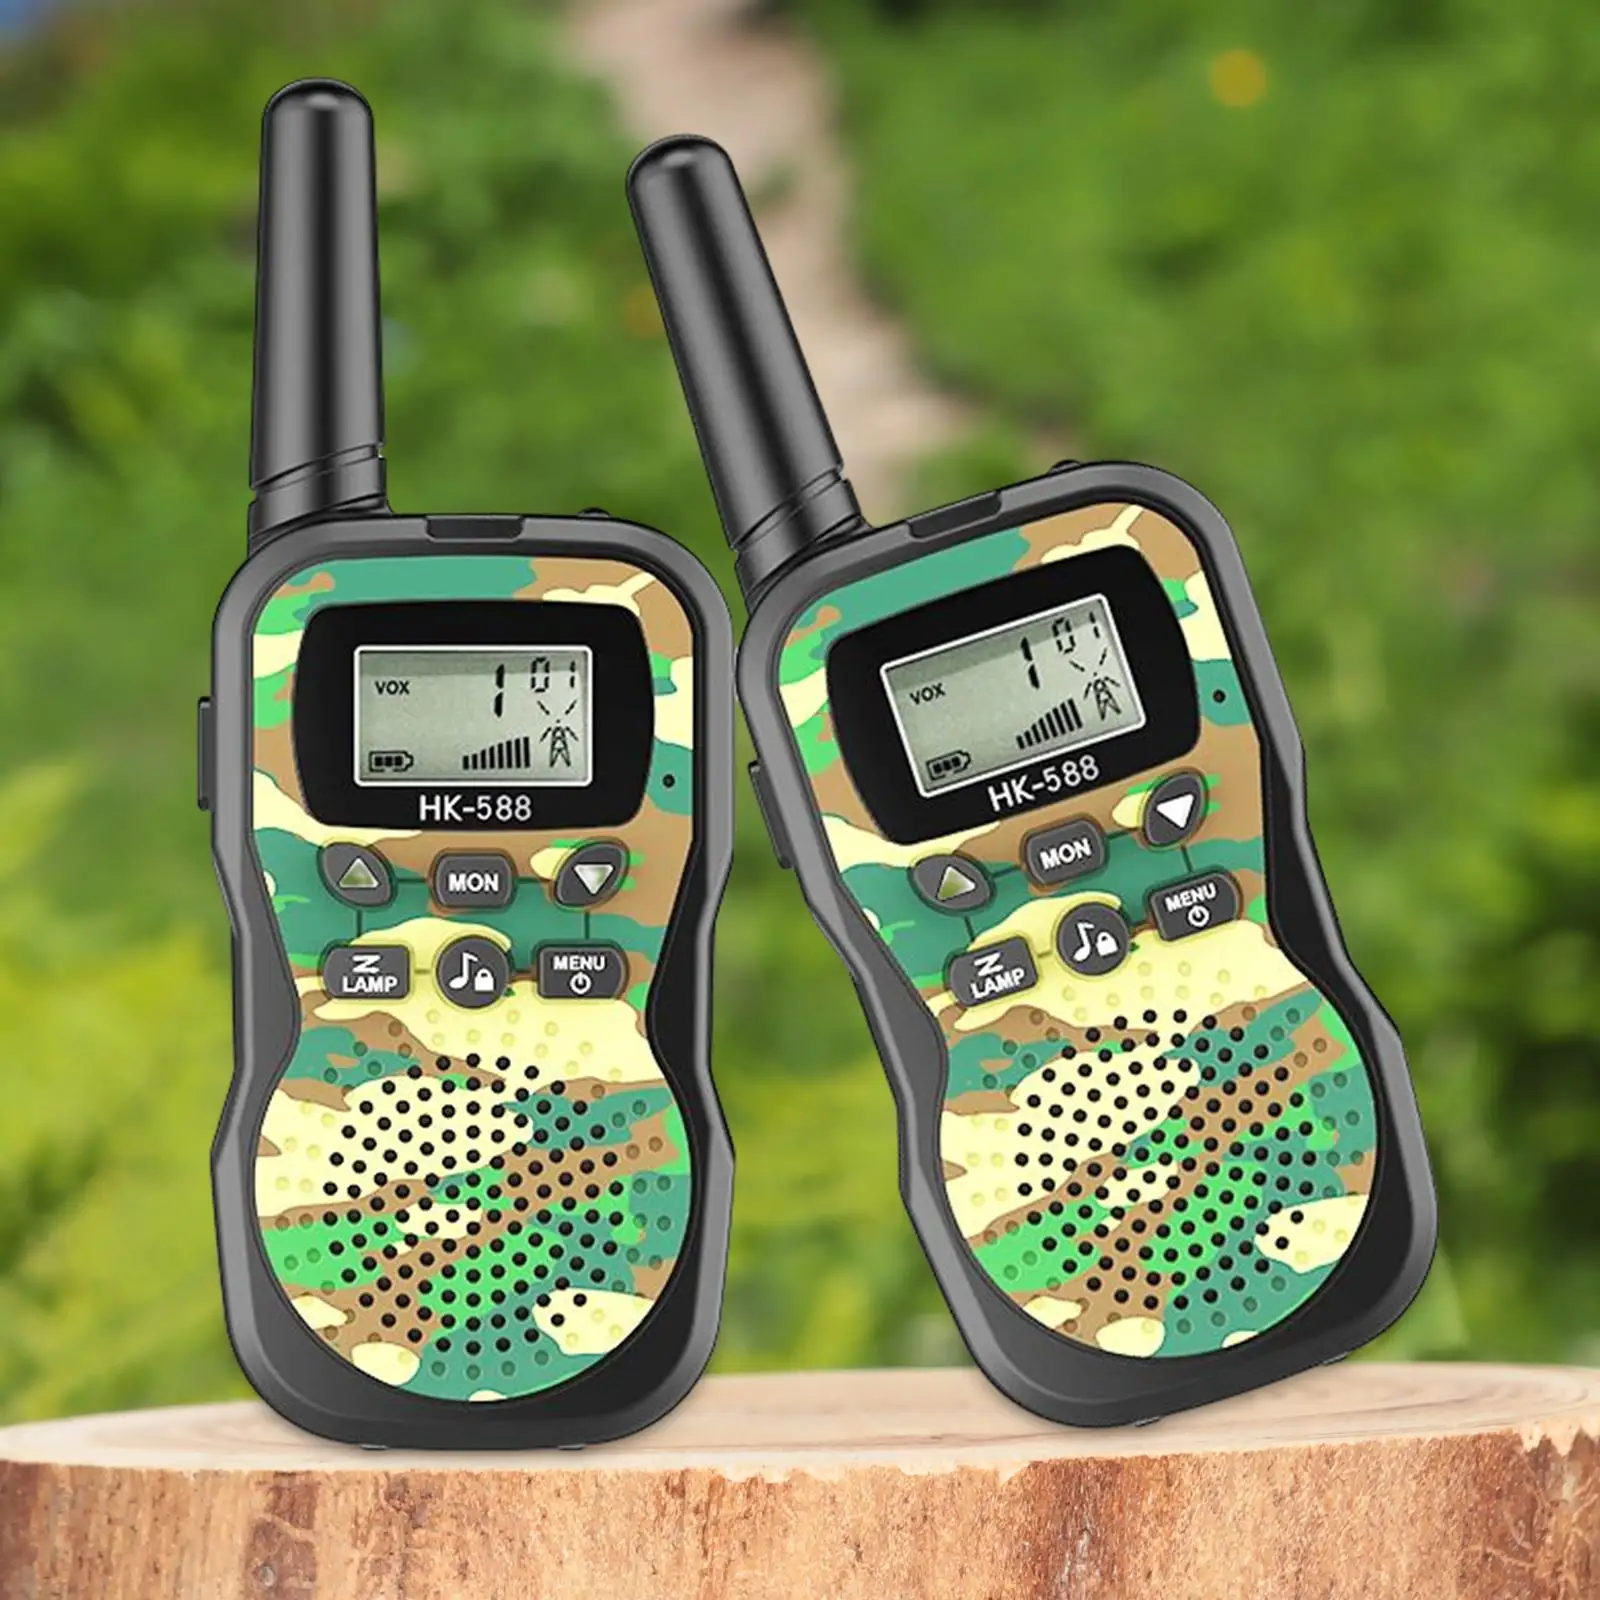 Portable Kids Walkie Toys Interphone Two Way Radios Durable with Backlit LCD